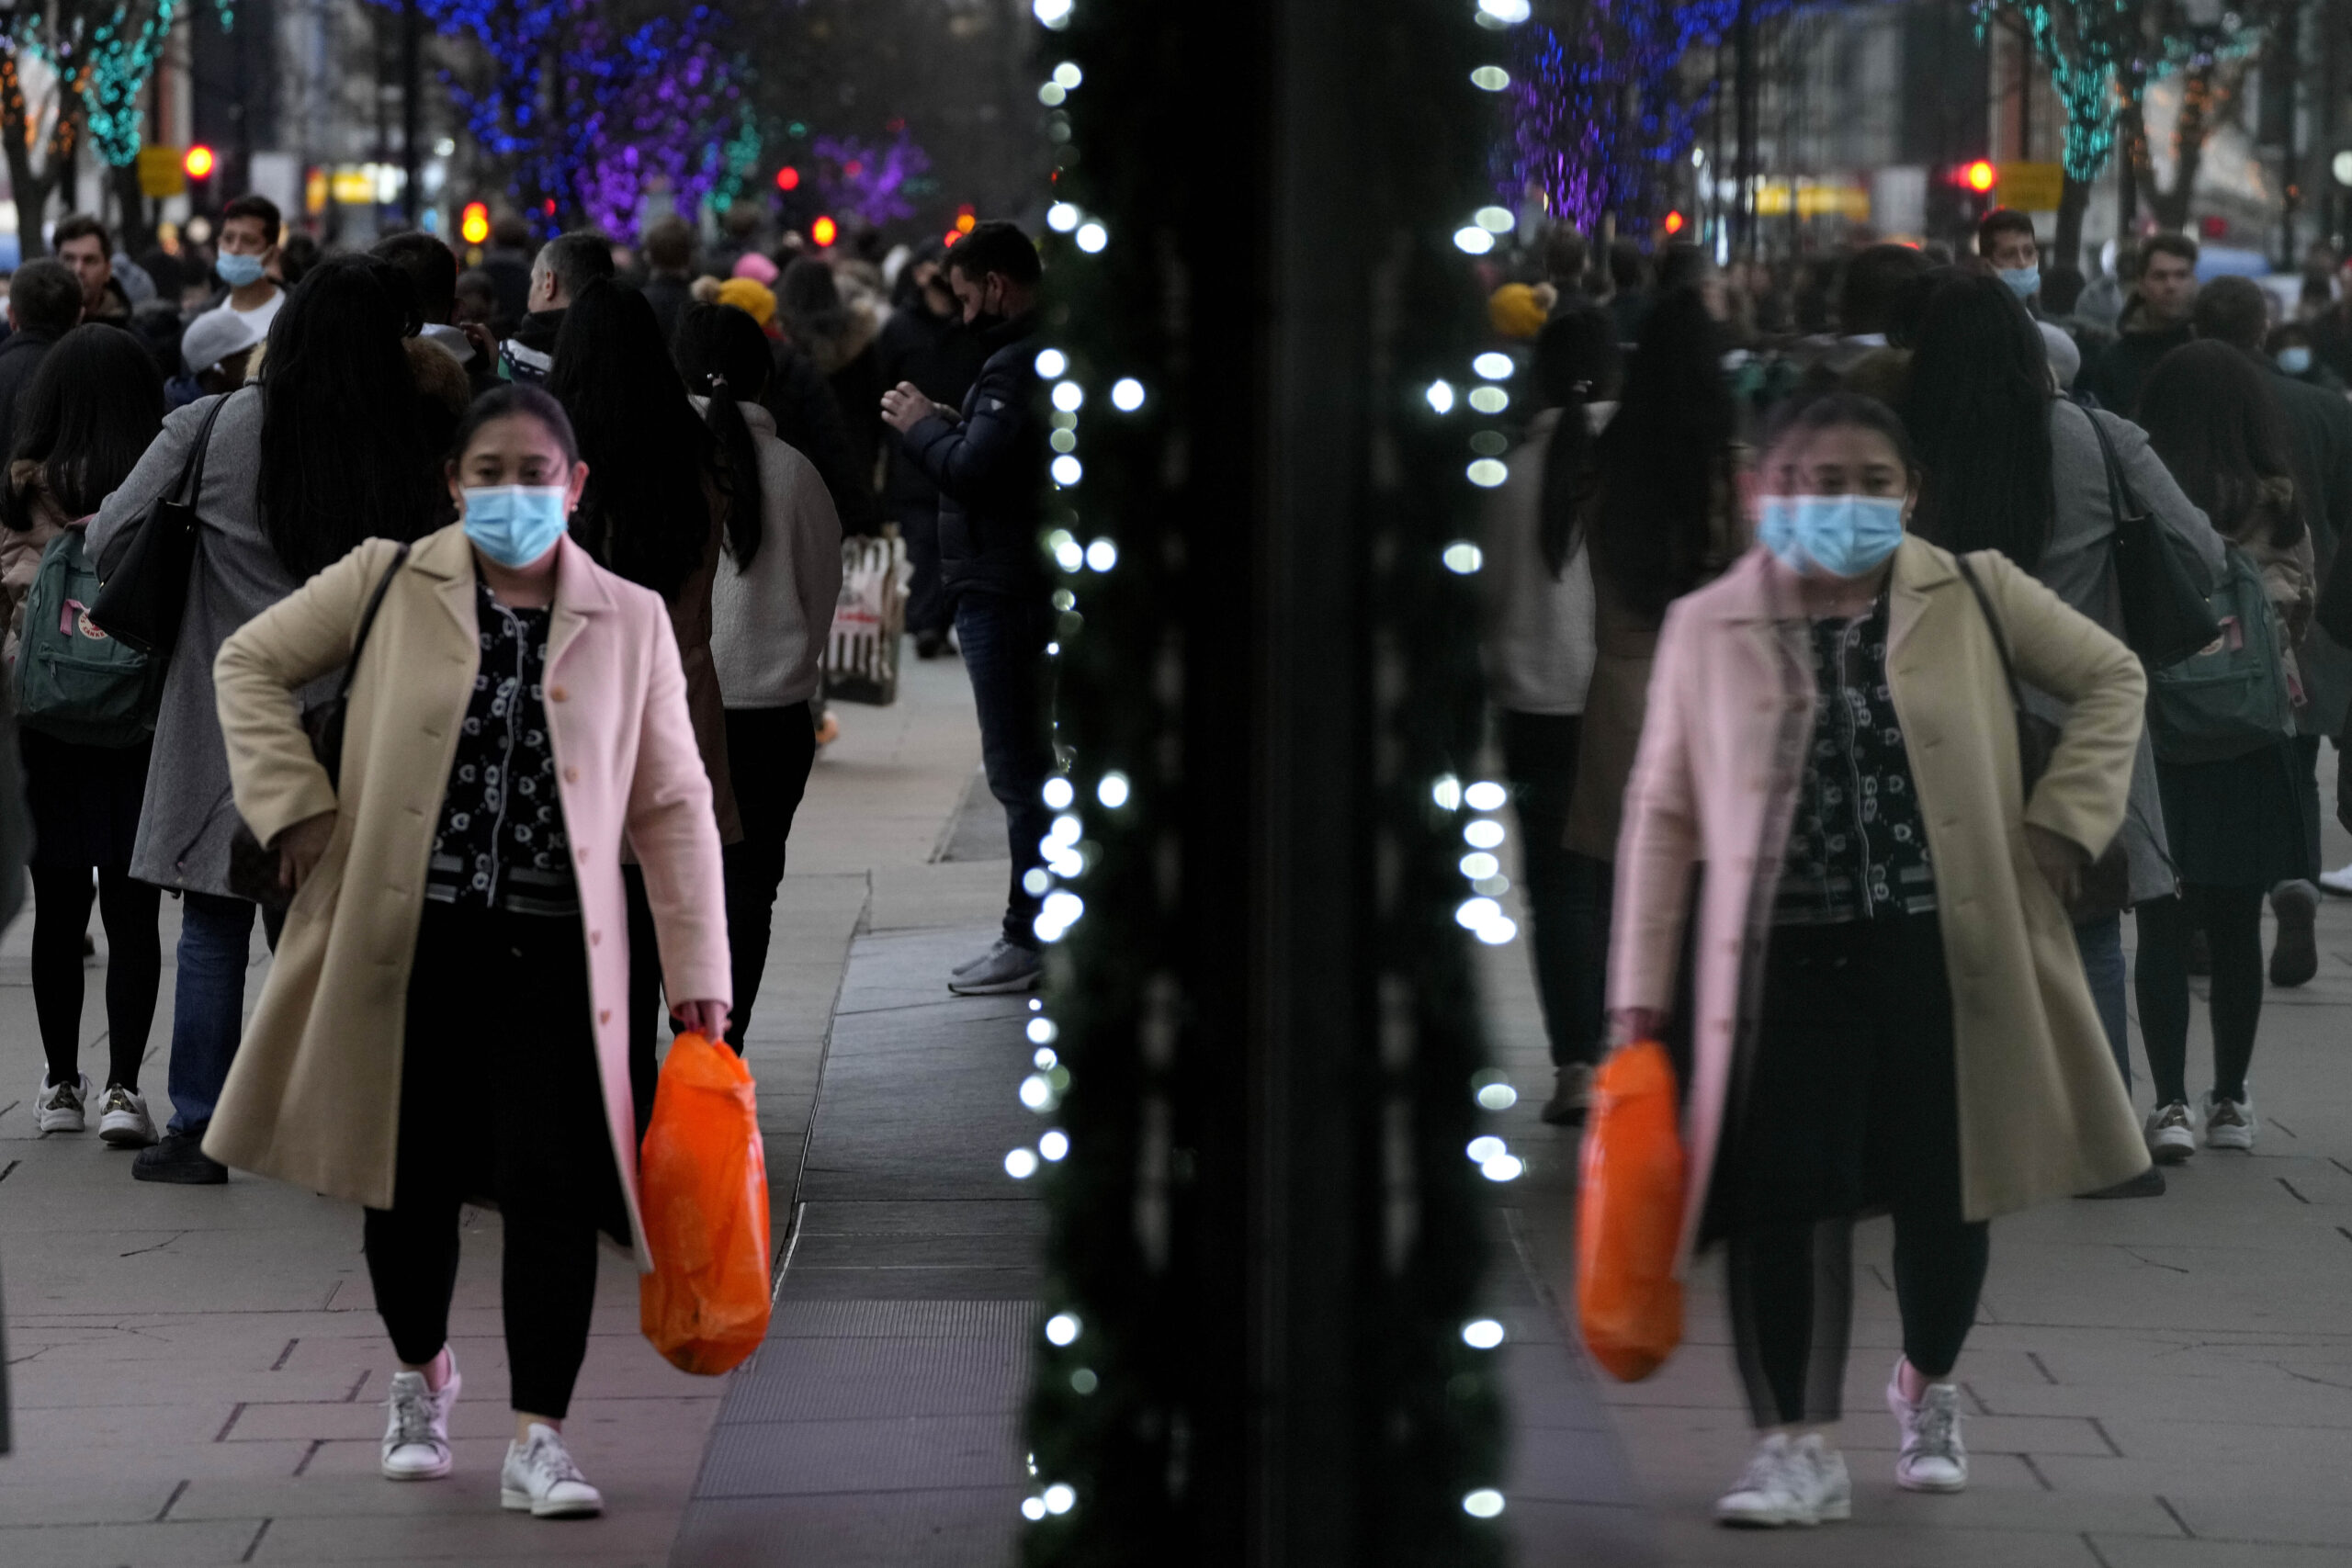 Shoppers are reflected in a window as they walk down Oxford Street, Europe's busiest shopping street, in London, Thursday, Dec. 23, 2021. (AP Photo/Frank Augstein)